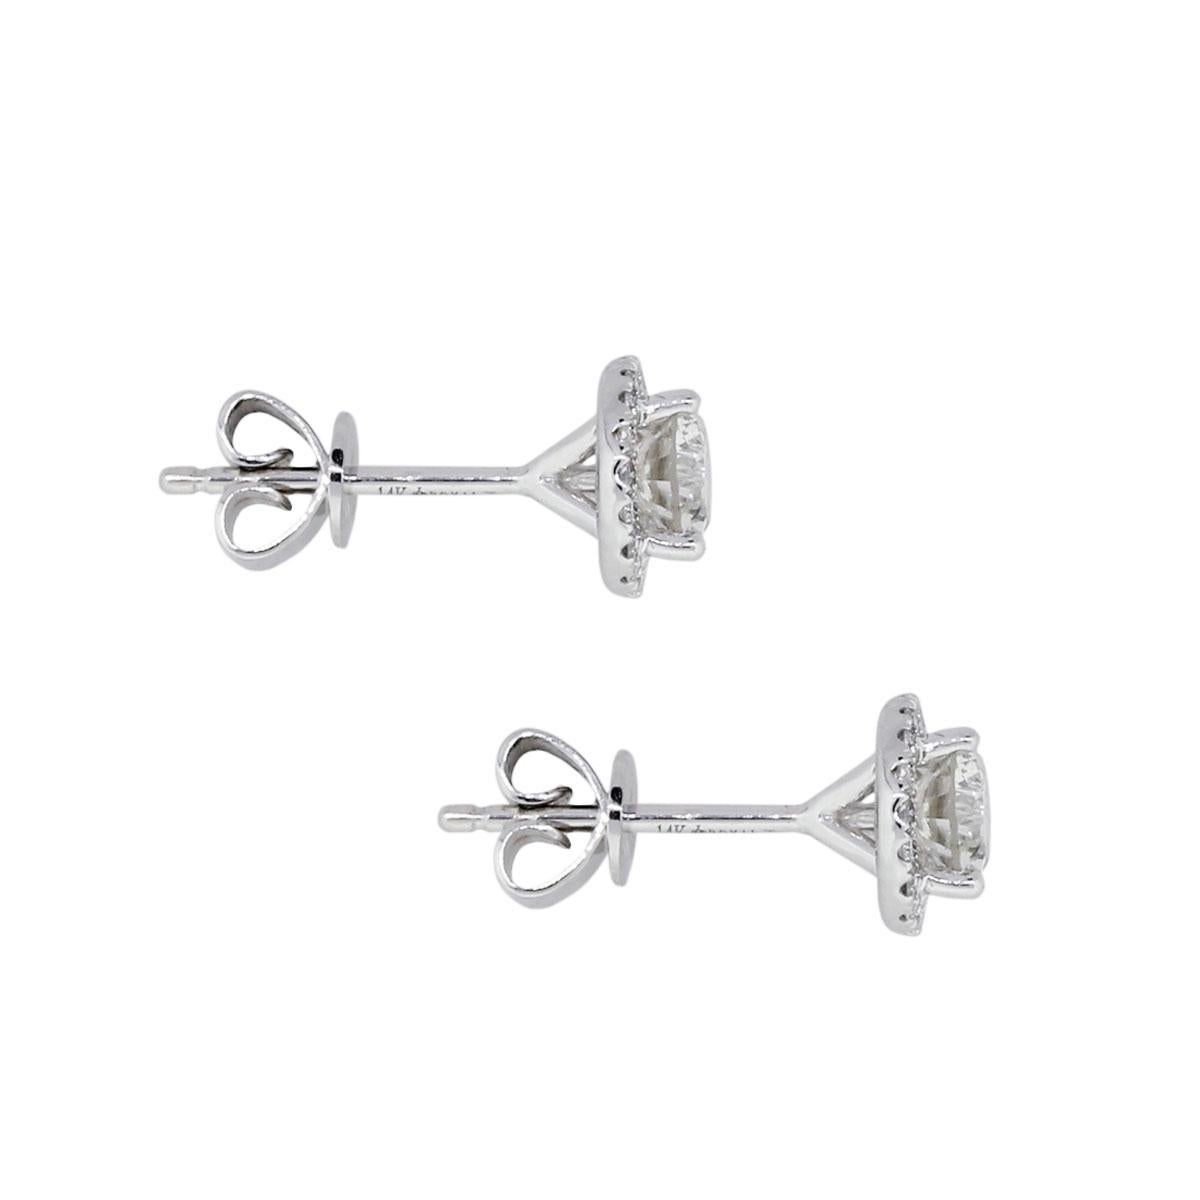 Material: 14k white gold
Diamond Details: Approximately 1ctw of round brilliant diamonds. Diamonds are G/H in color and SI in clarity.
Measurements: 0.61″ x 0.21″ x 0.21″
Earring Backs: Post friction
Total Weight: 1.4g (0.9dwt)
Additional Details: